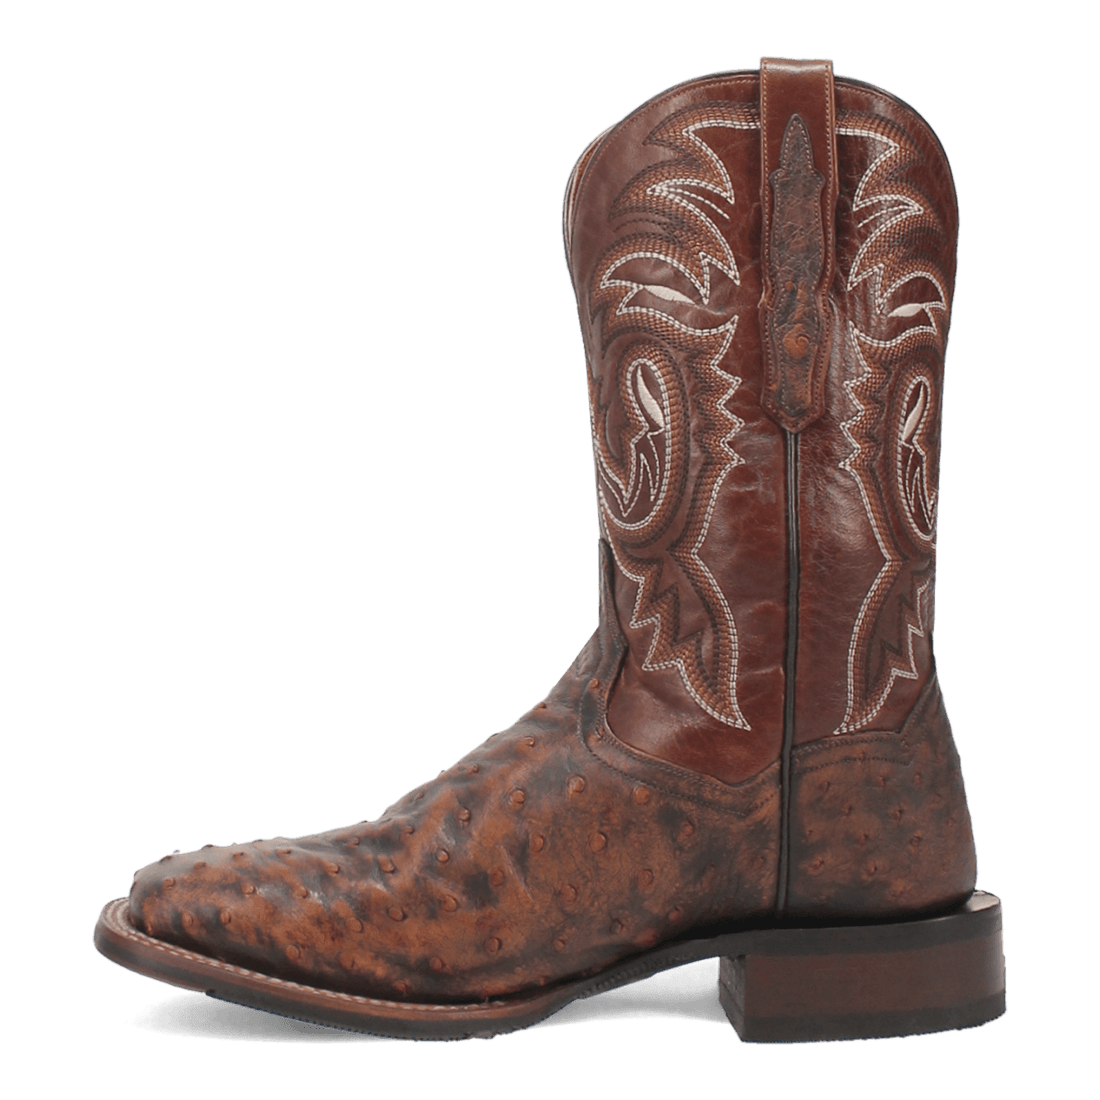 DILLINGER FULL QUILL OSTRICH BOOT Preview #10